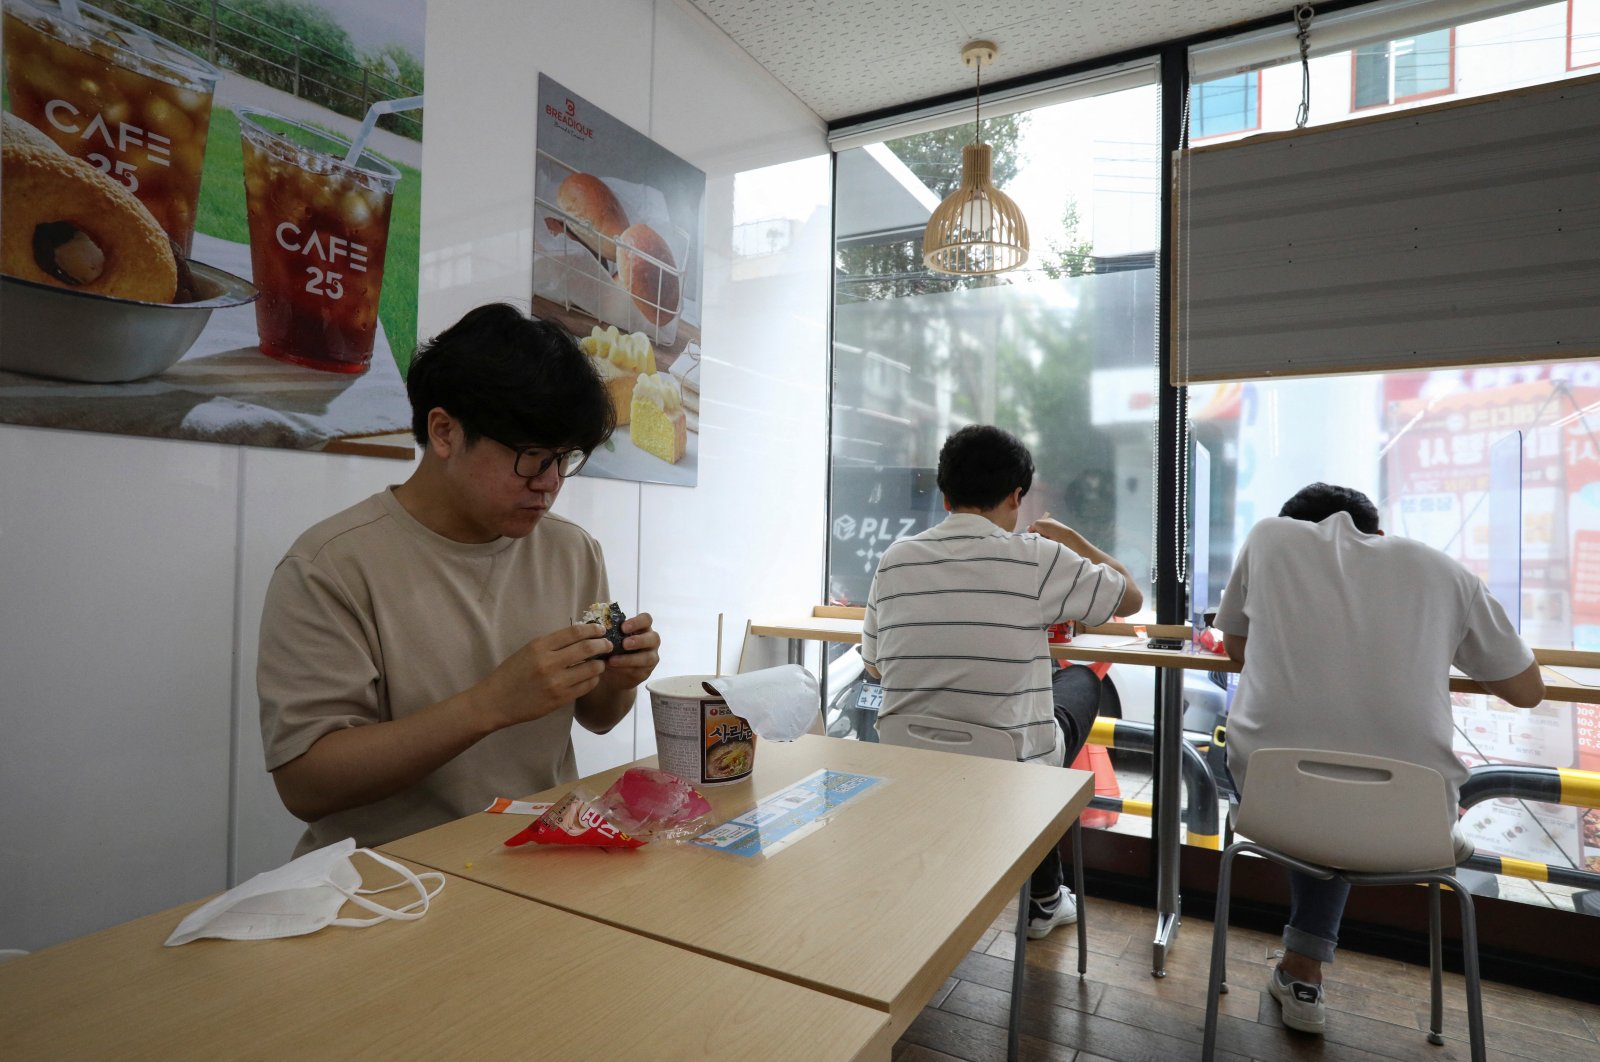 An office worker eats lunch at a convenience store in Seoul, South Korea, June 24, 2022. (Reuters Photo)